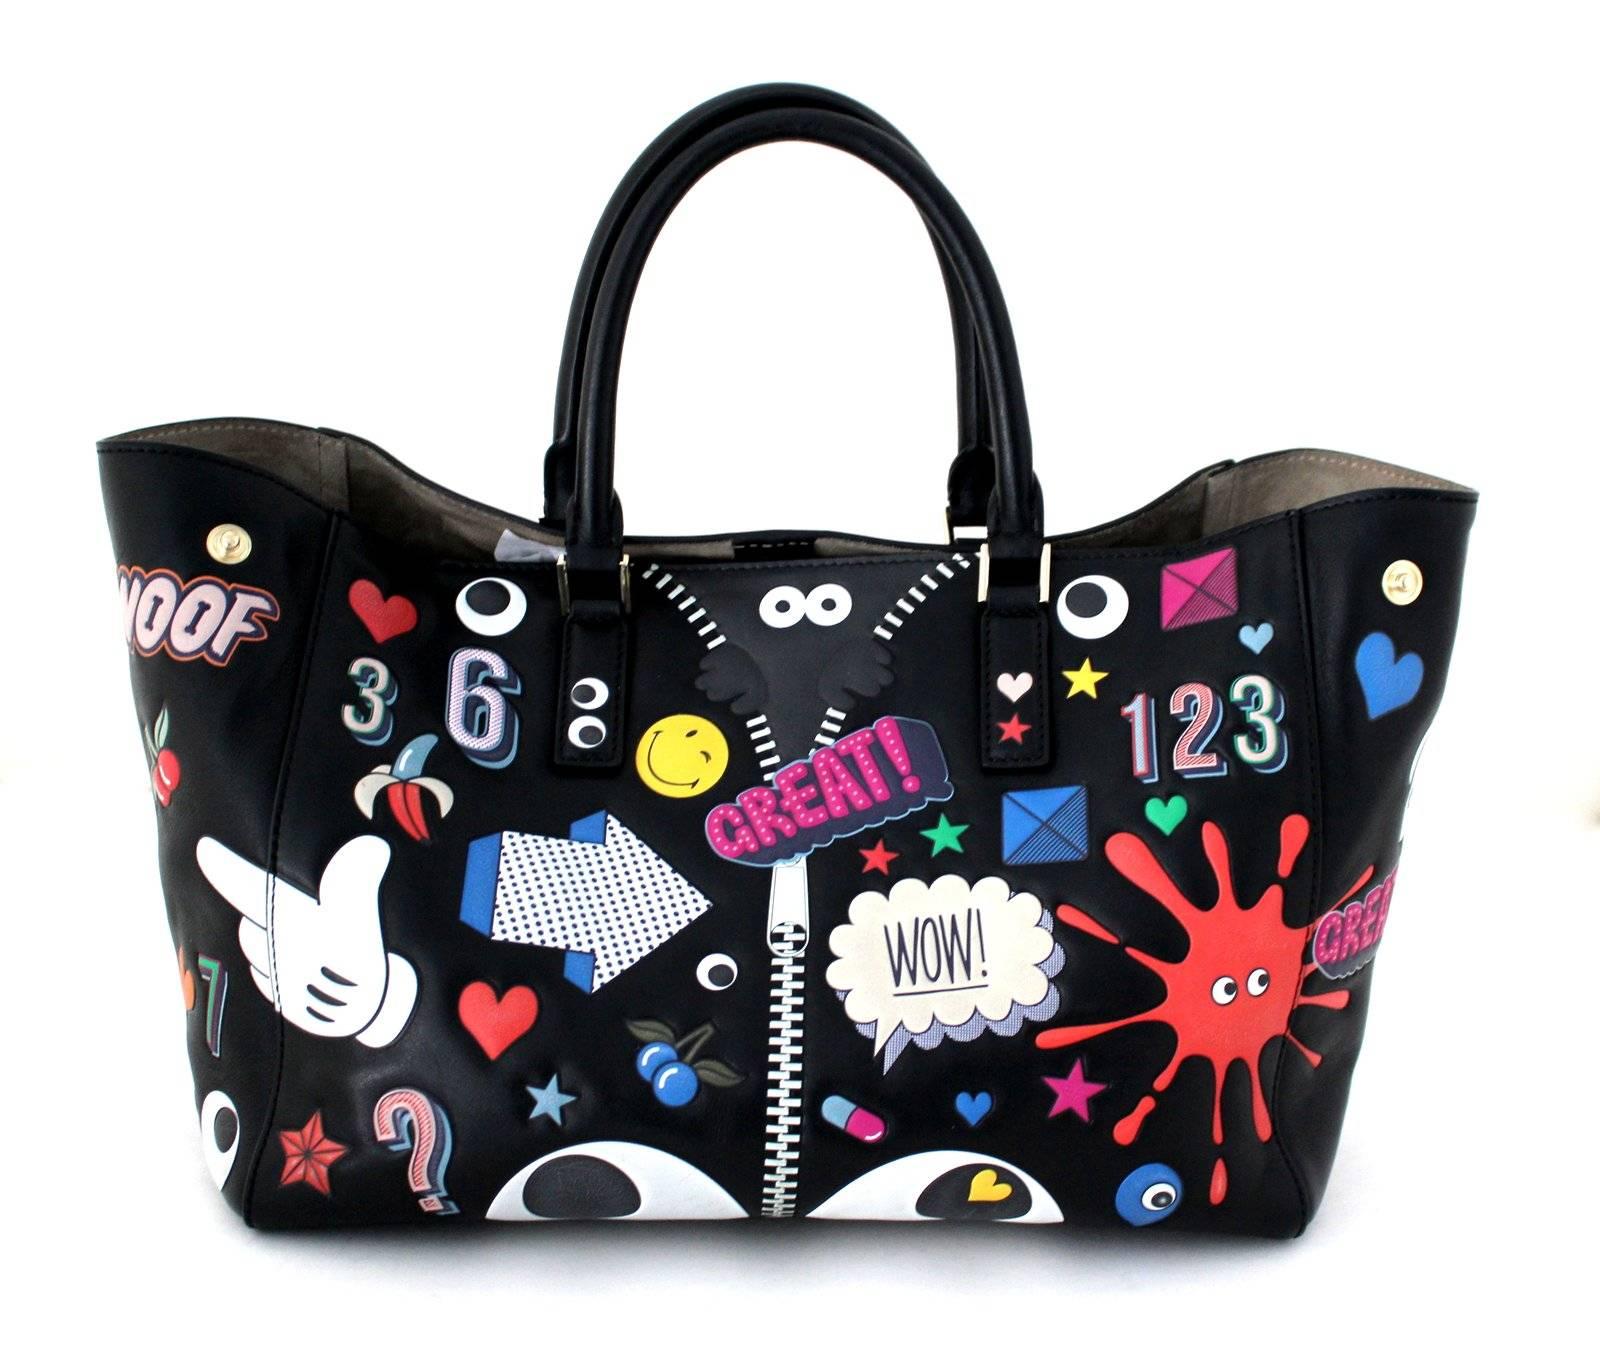 Anya Hindmarch Black Ebury Circus Tote Bag- Retail $2,559.00
MINT Condition!!  Carried two or times and carefully stored.  Fantastic Find!
From the 2015 collection, this whimsical carryall adds an element of fun to everyday dressing.
Black